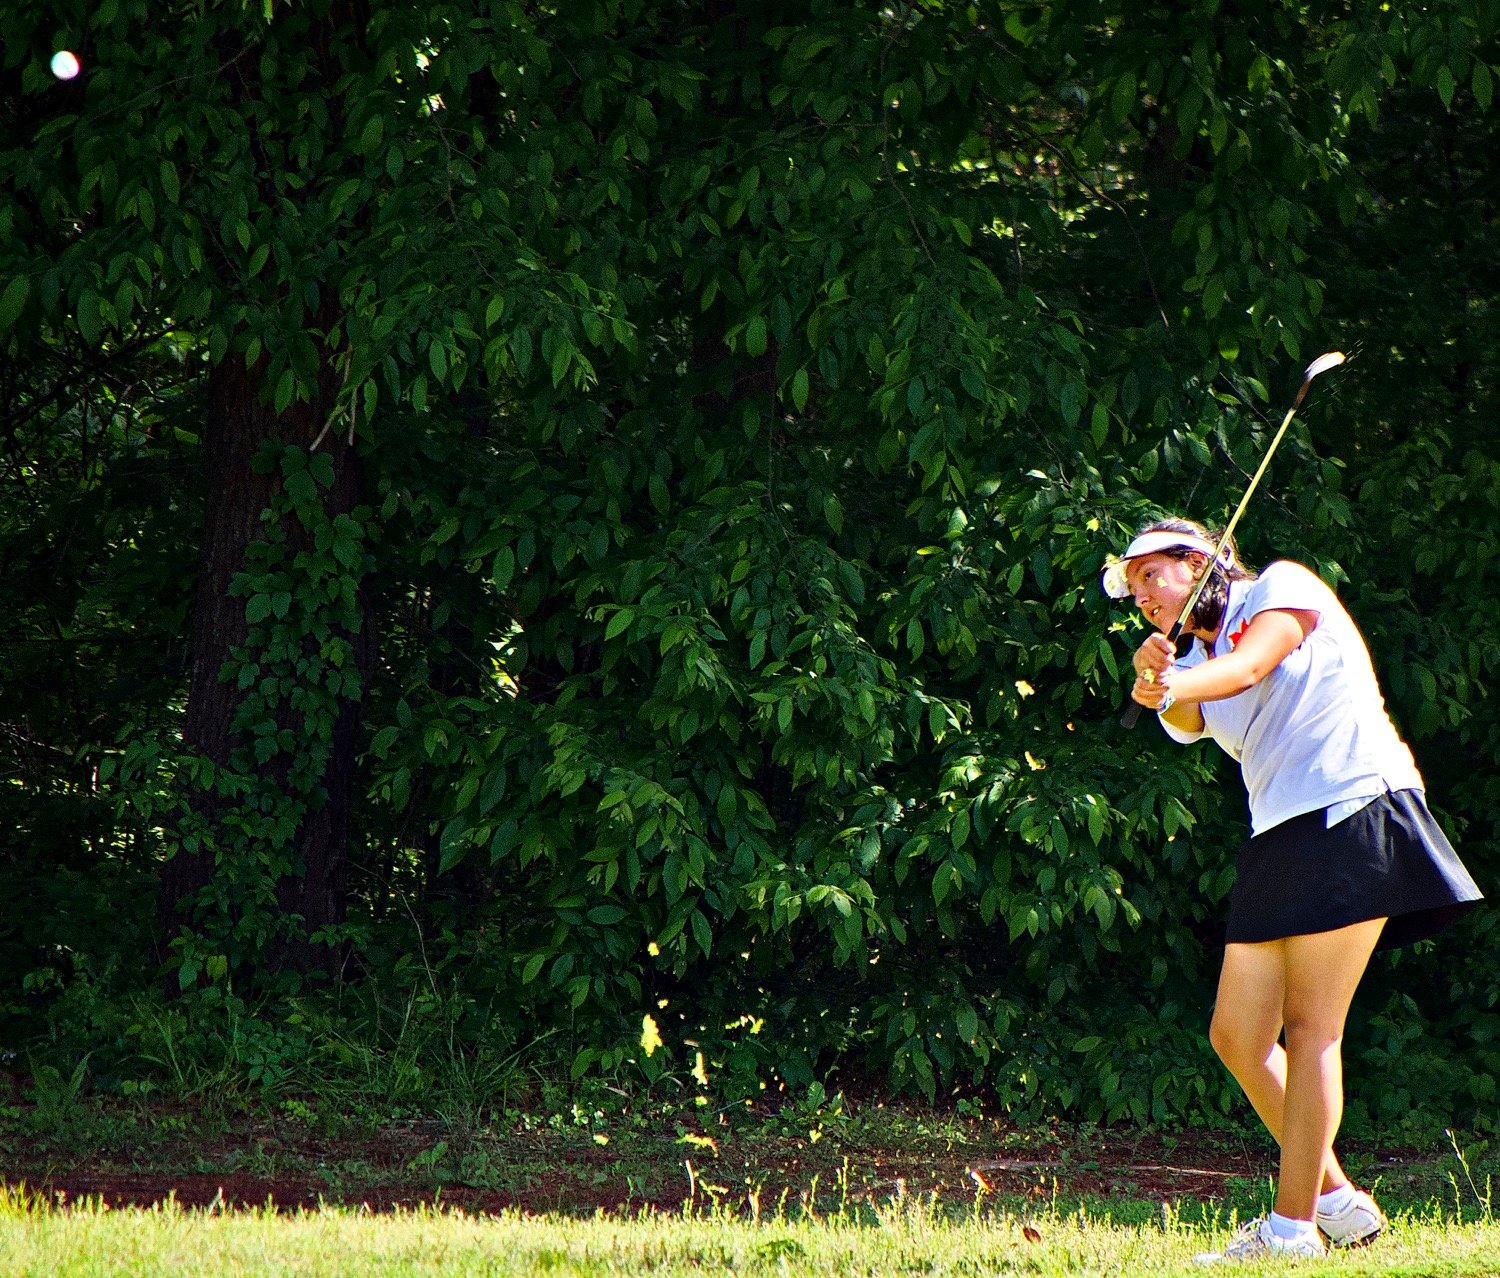 Savannah Lopez stays out of trouble on Monday. She improved her score dramatically the next day, shaving 15 strokes to score 97. [see more shots]